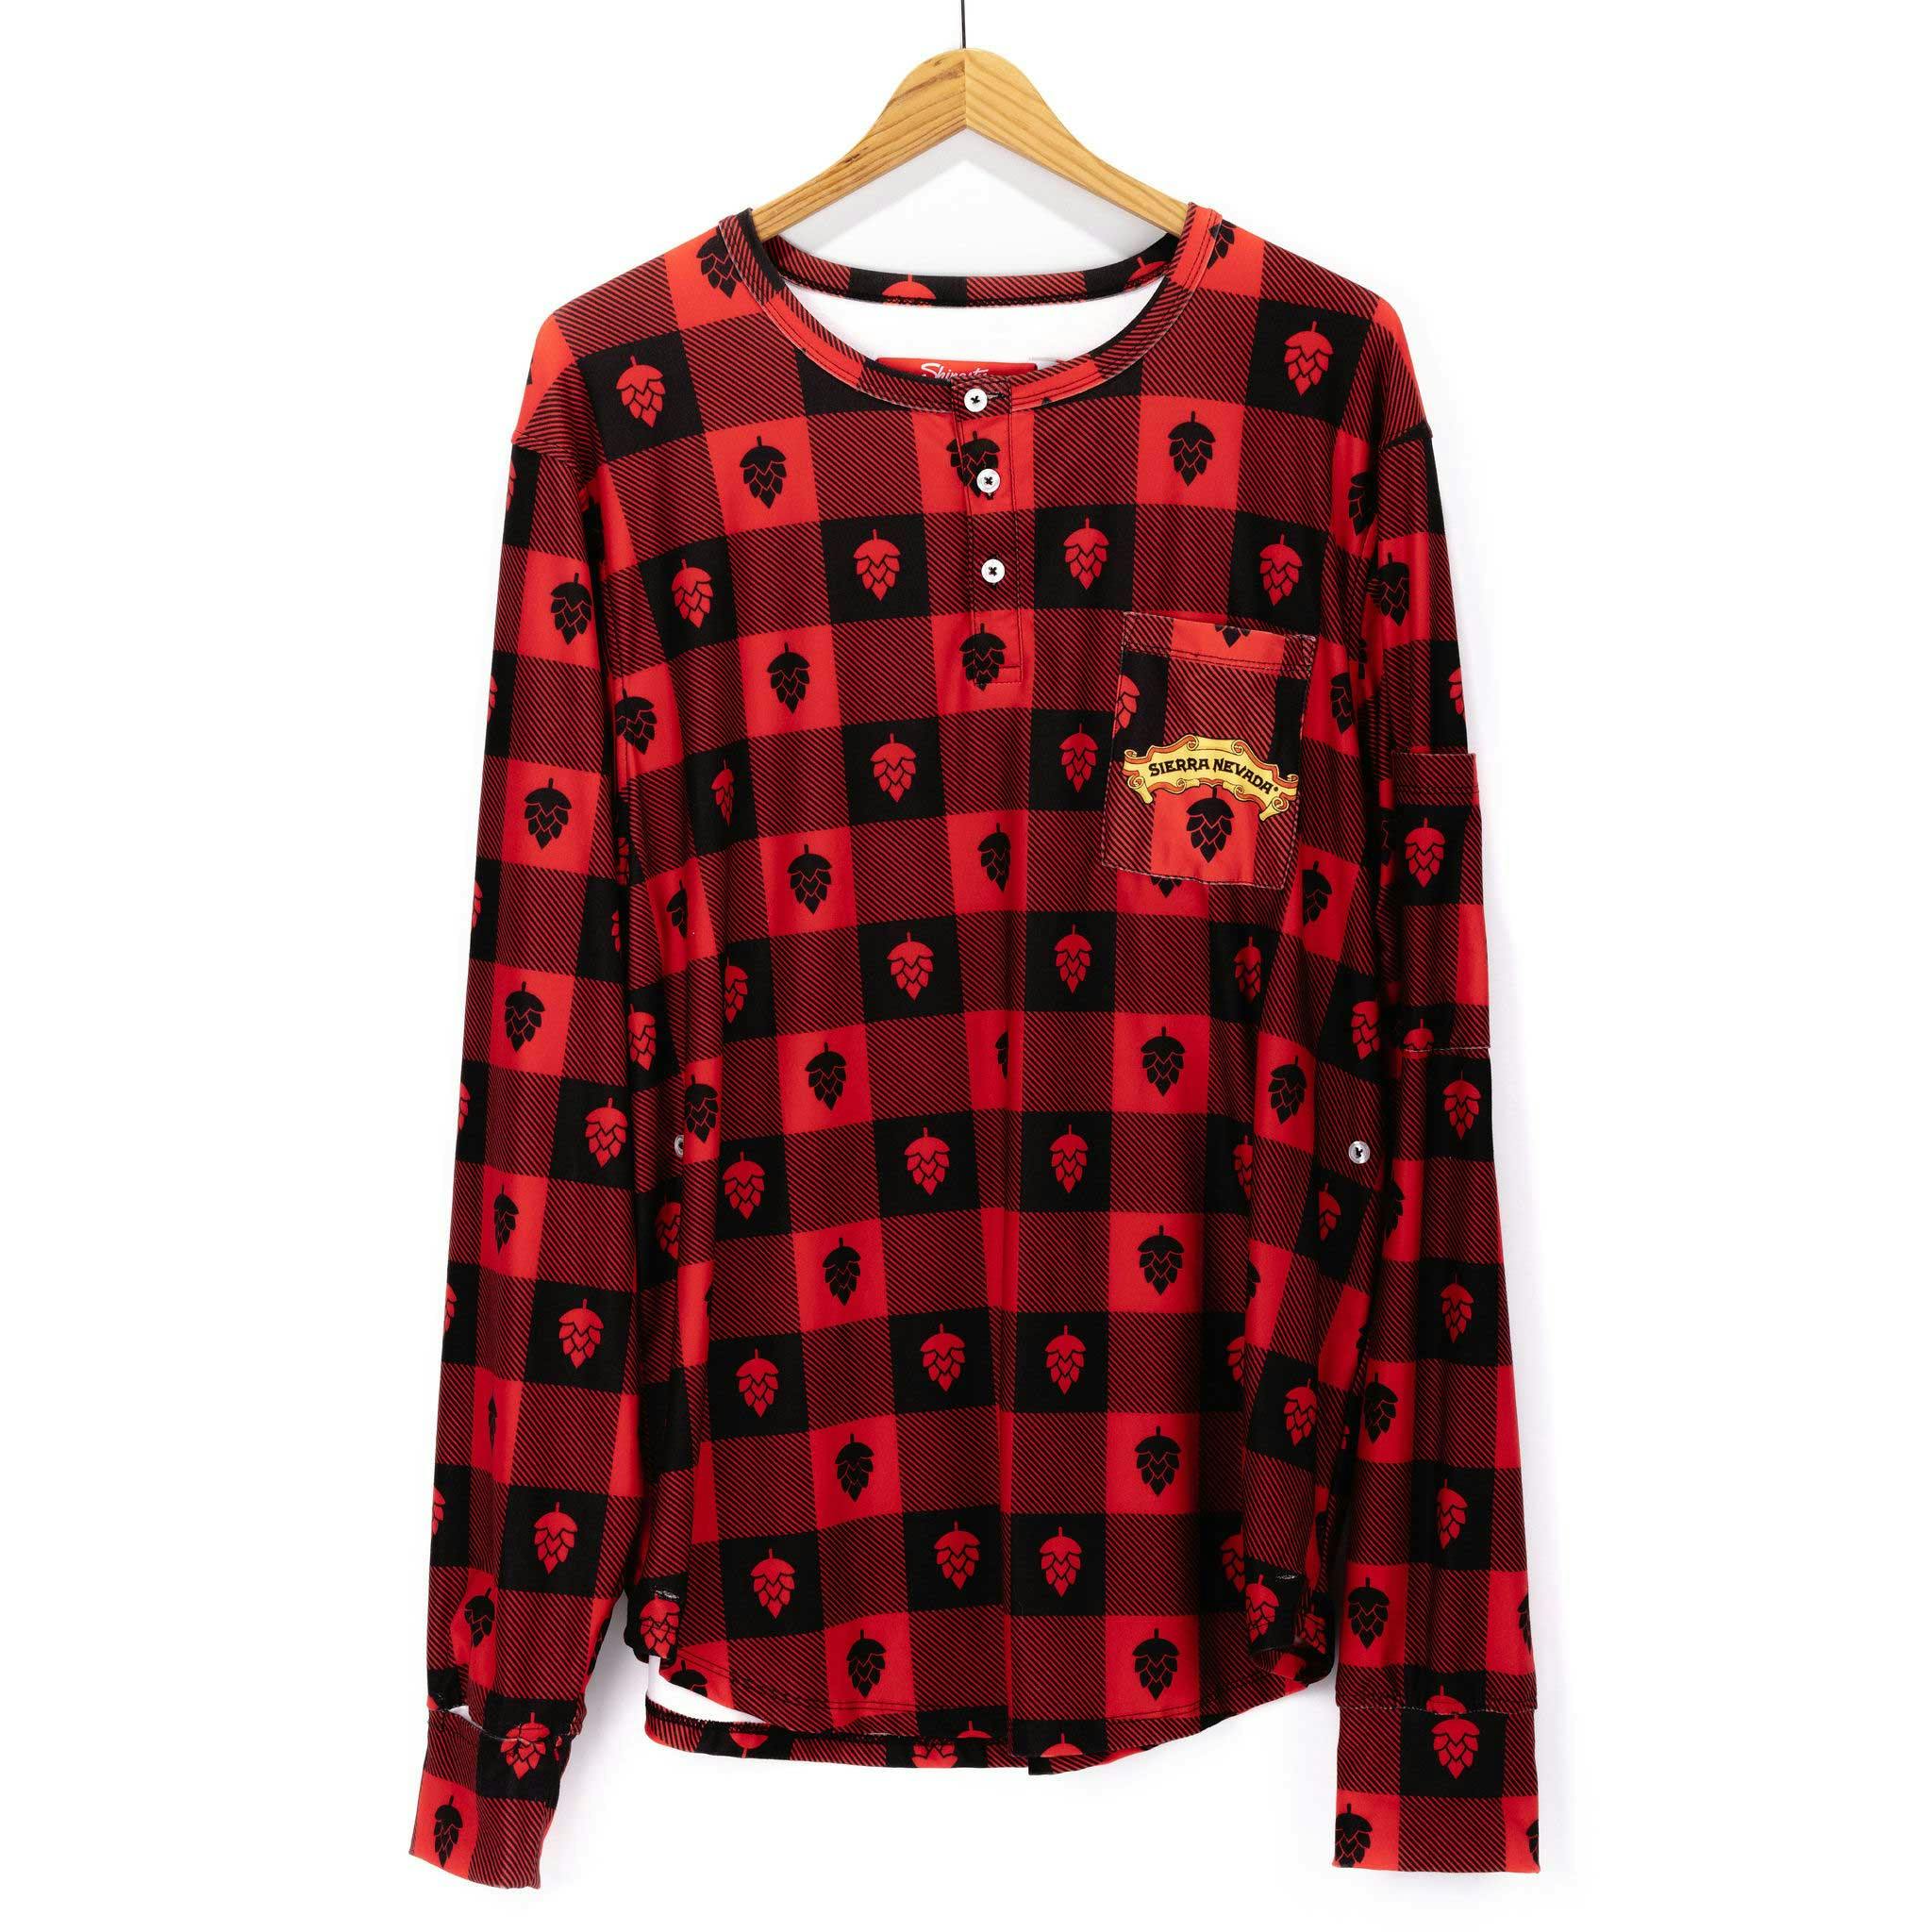 Front view of the Sierra Nevada red pajama top with a hop pattern